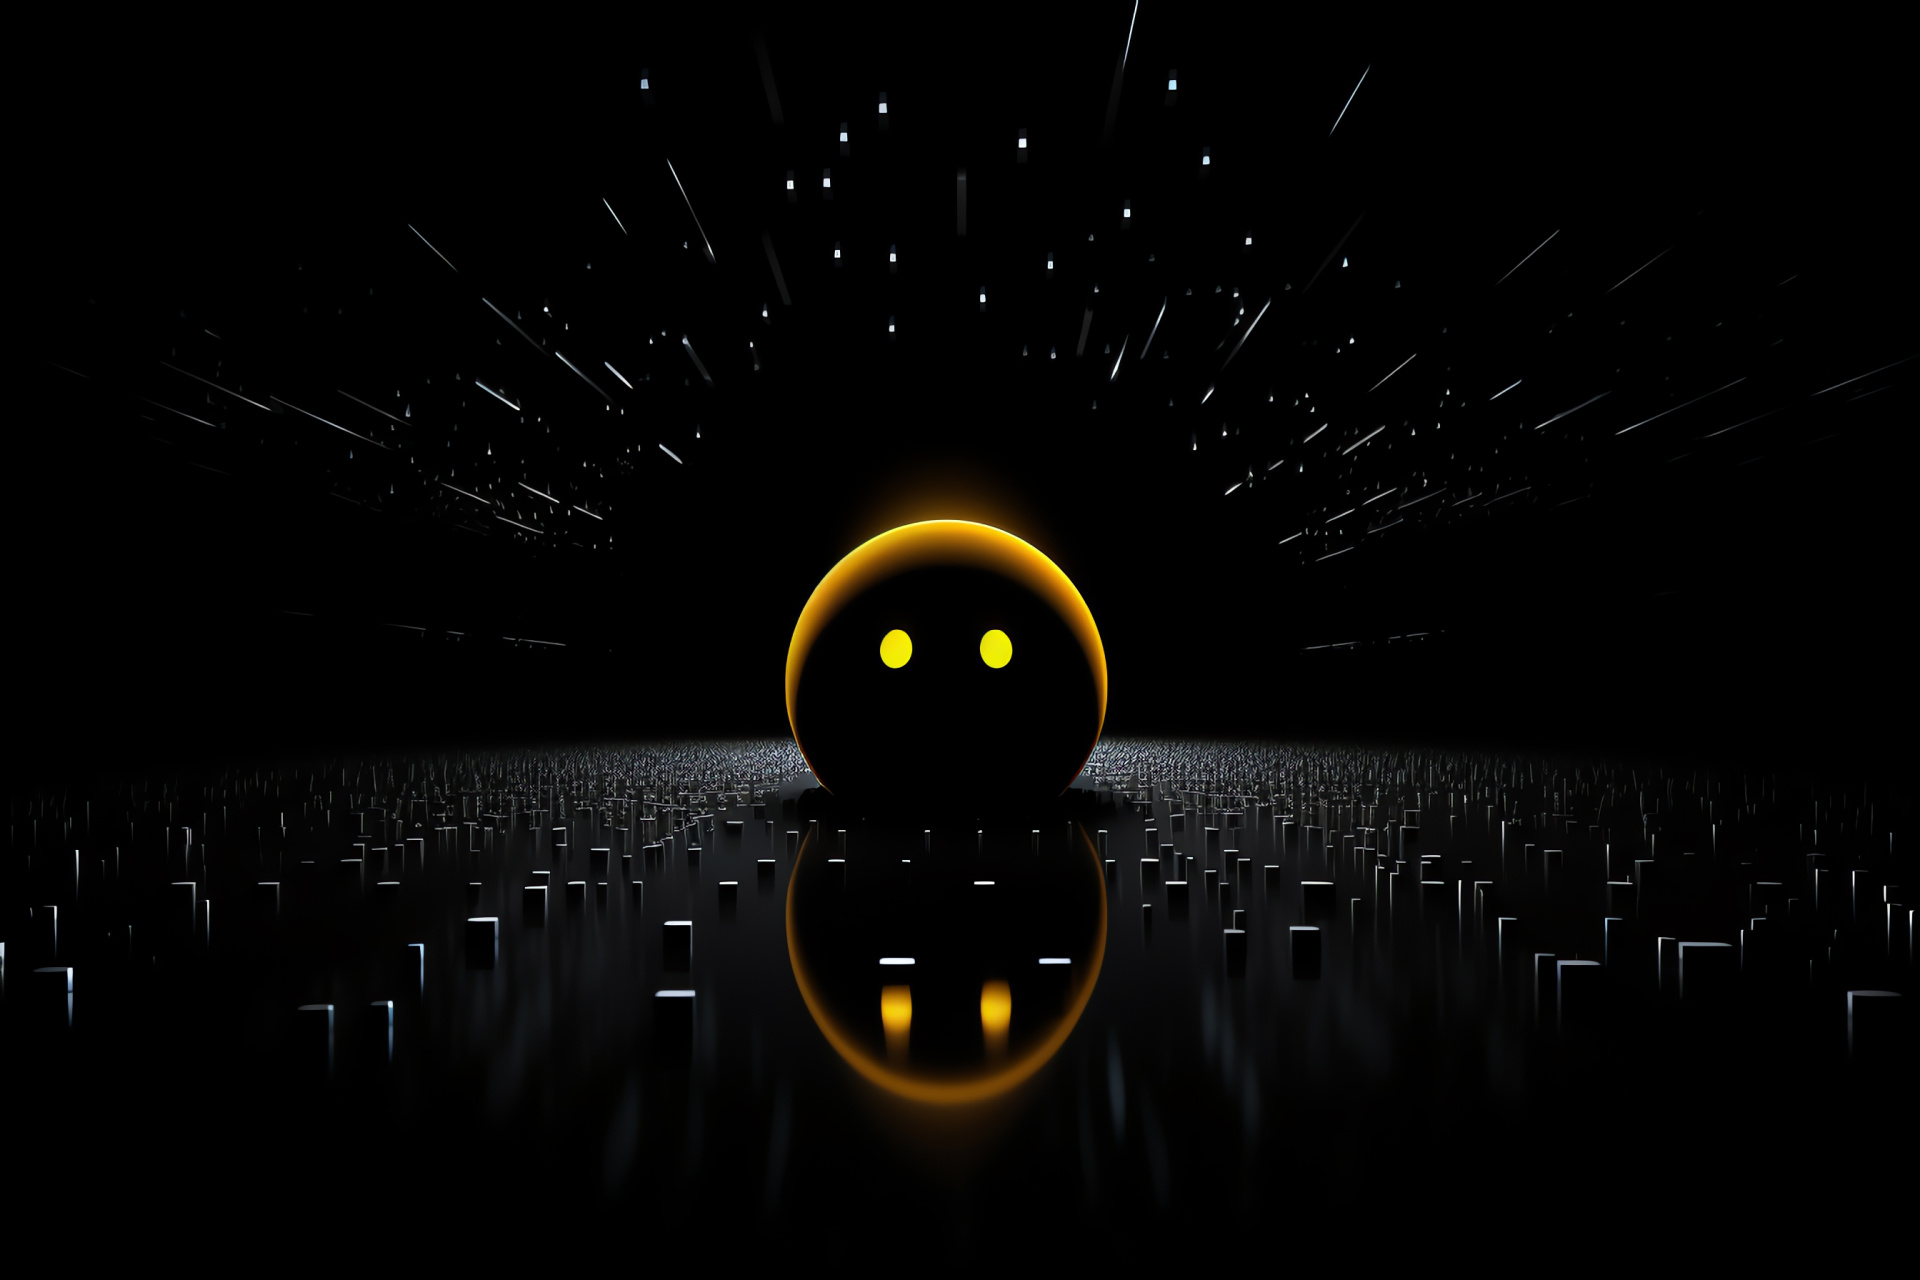 Arcade protagonist Pacman, Timeless gaming character, Bright pellet consumer, Simple visage, Icon of gaming, HD Desktop Wallpaper